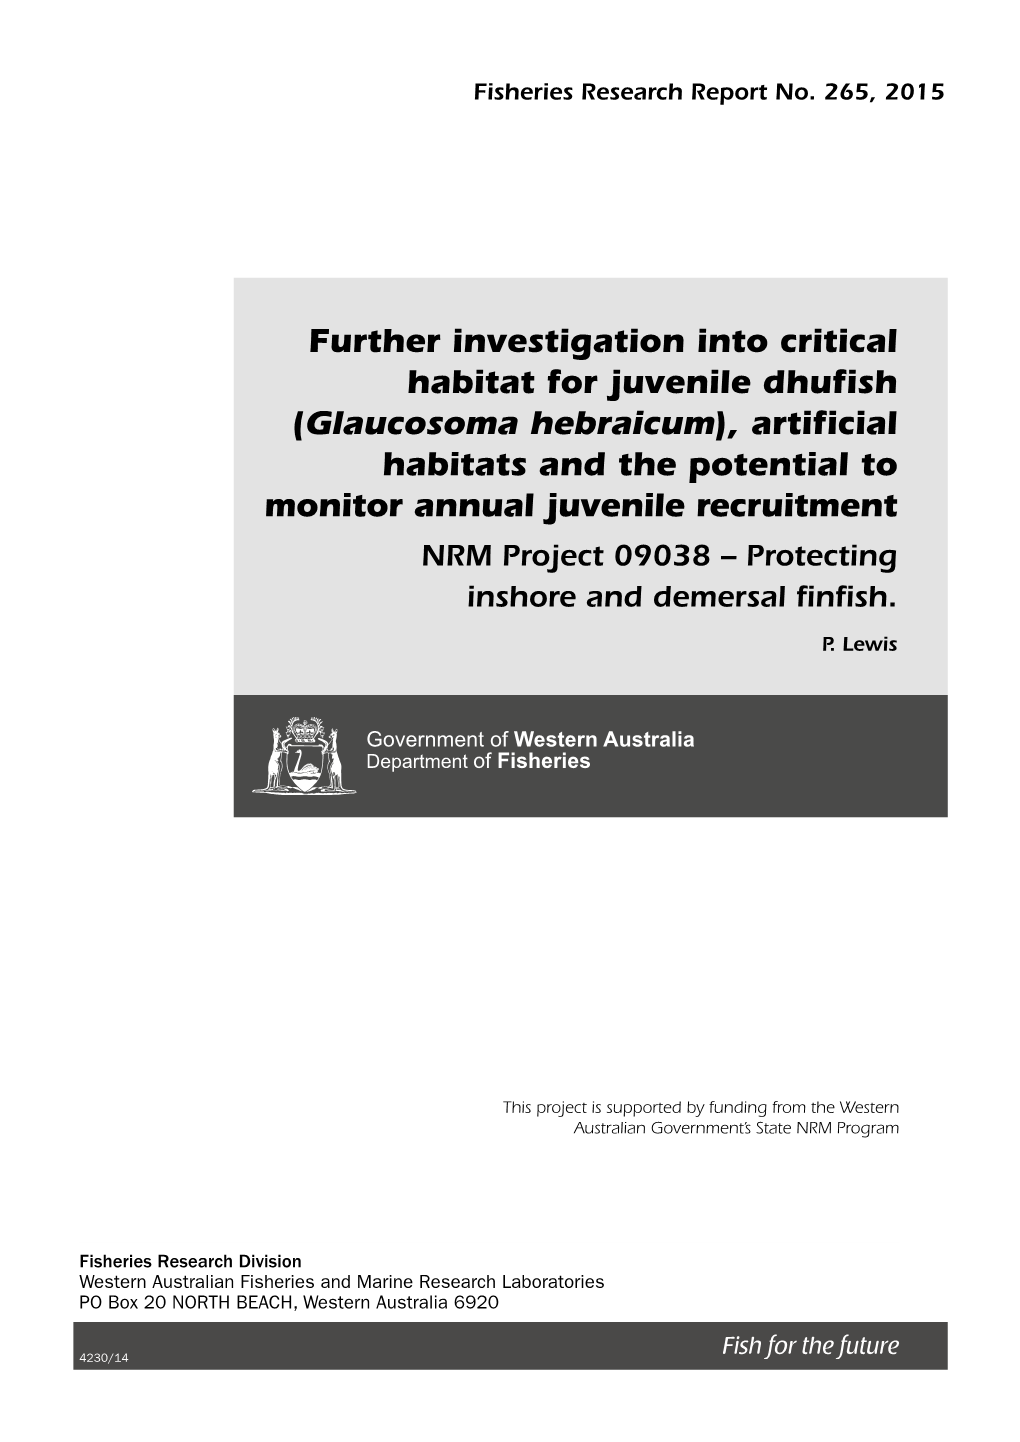 Further Investigation Into Critical Habitat for Juvenile Dhufish